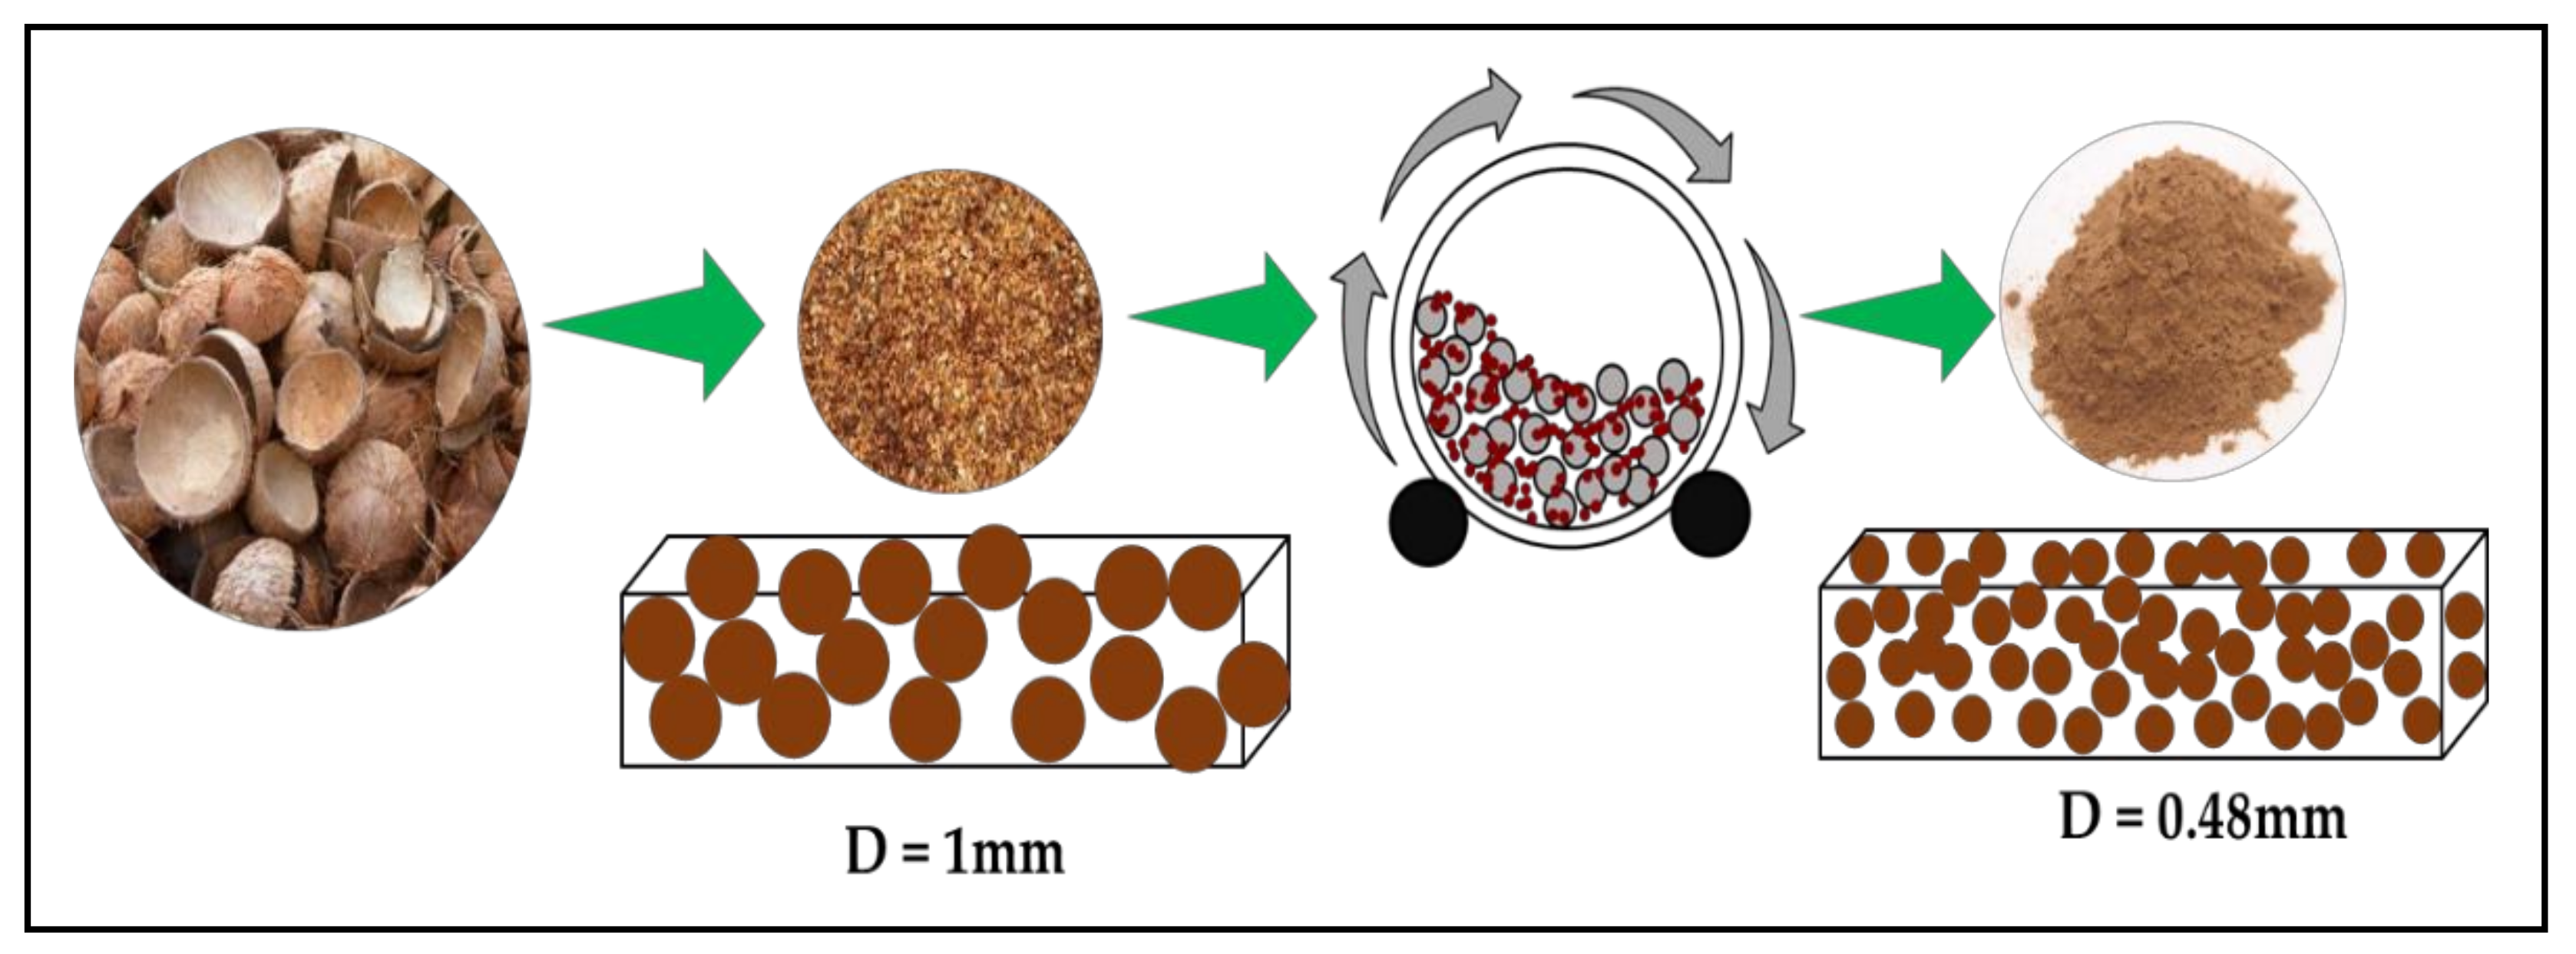 selecting materials (a) coconut shell (b) coconut front 2.4 Combustion